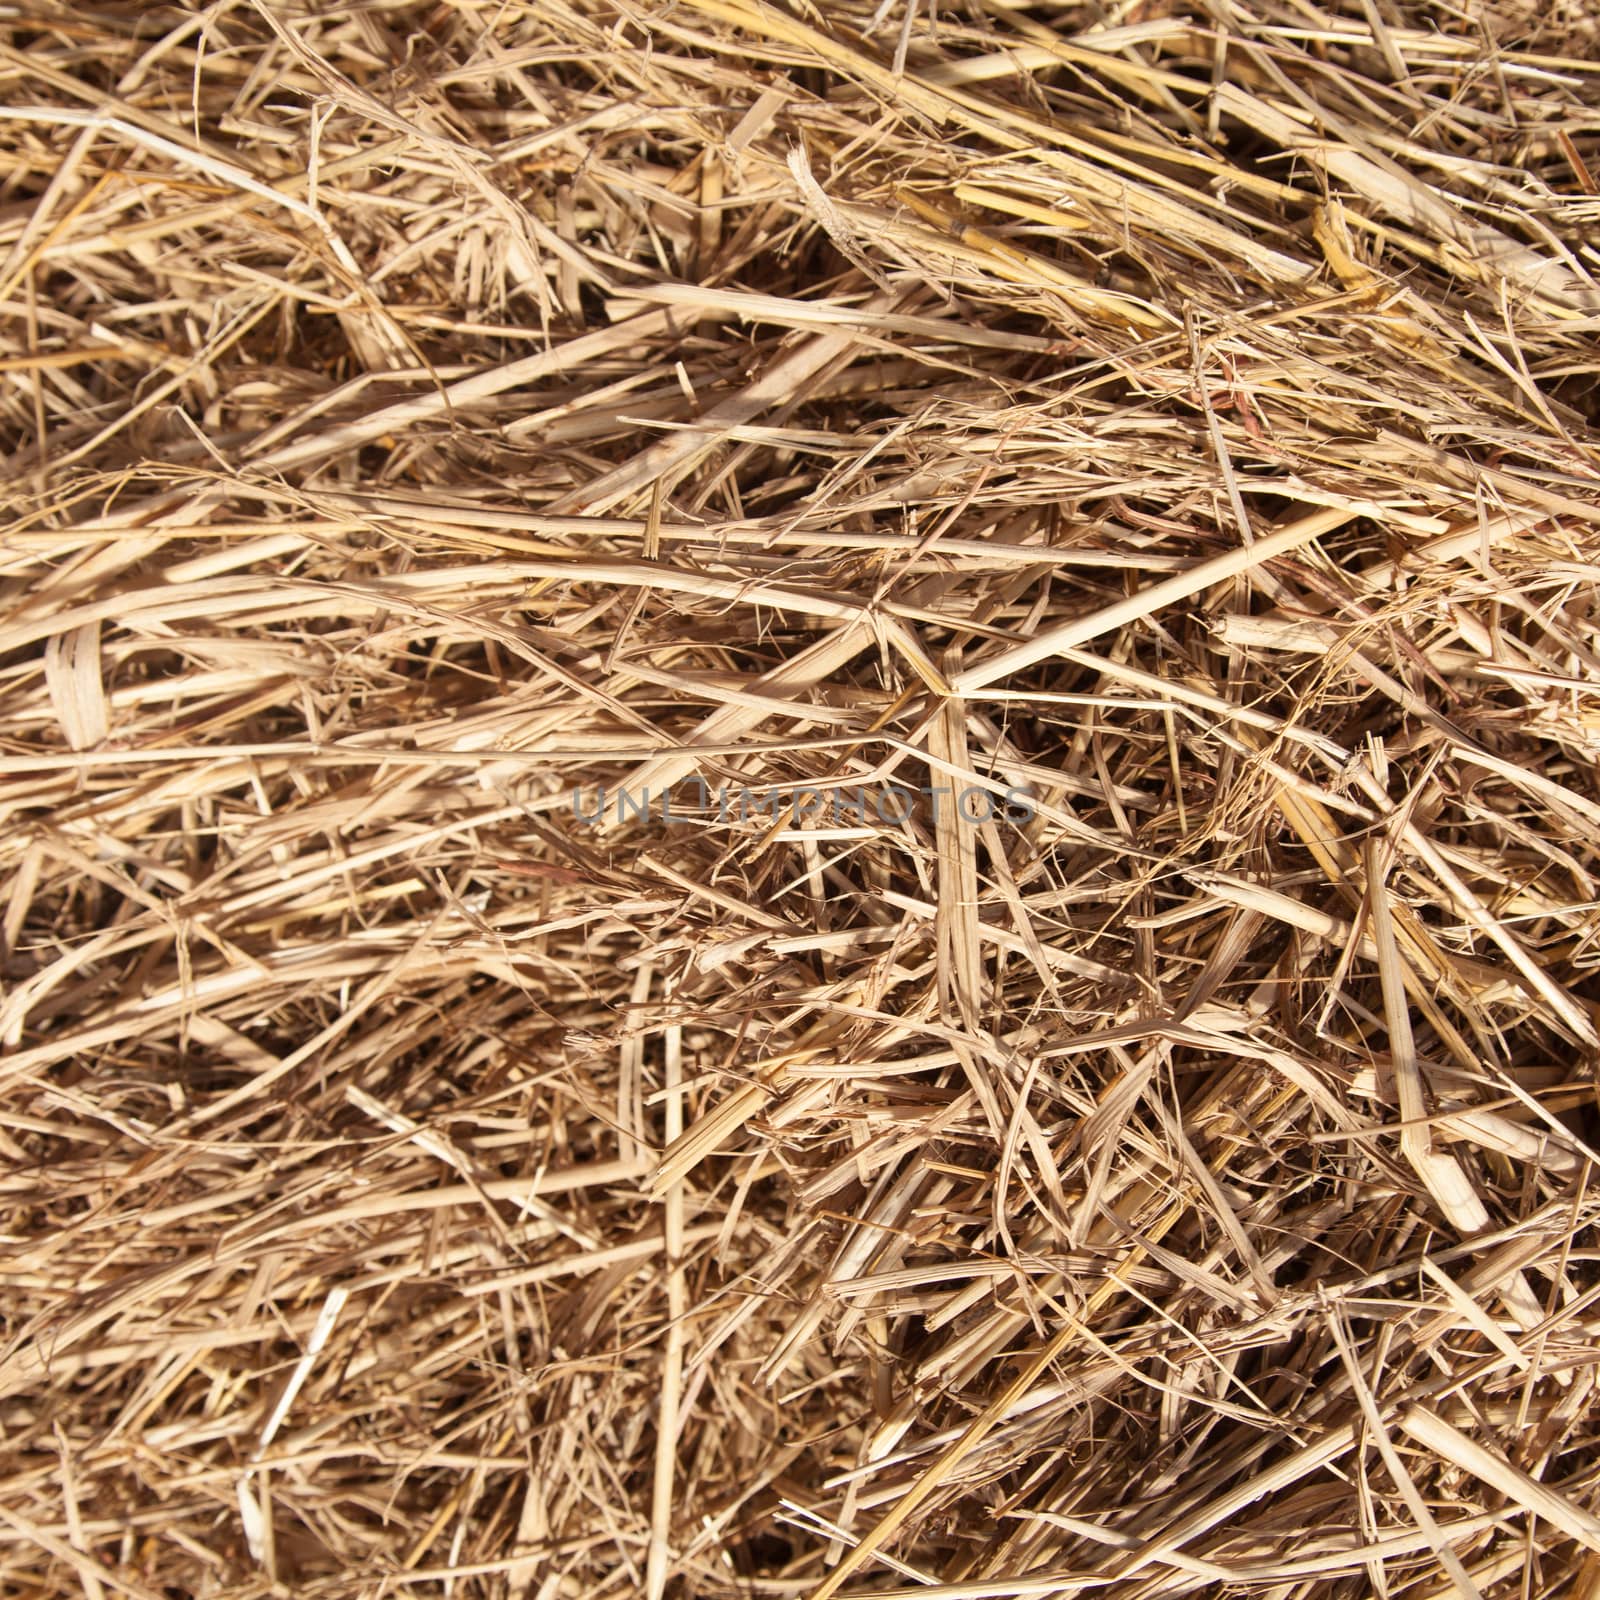 Straw dry deposition is a lot after the harvest of agricultural crops from the field.